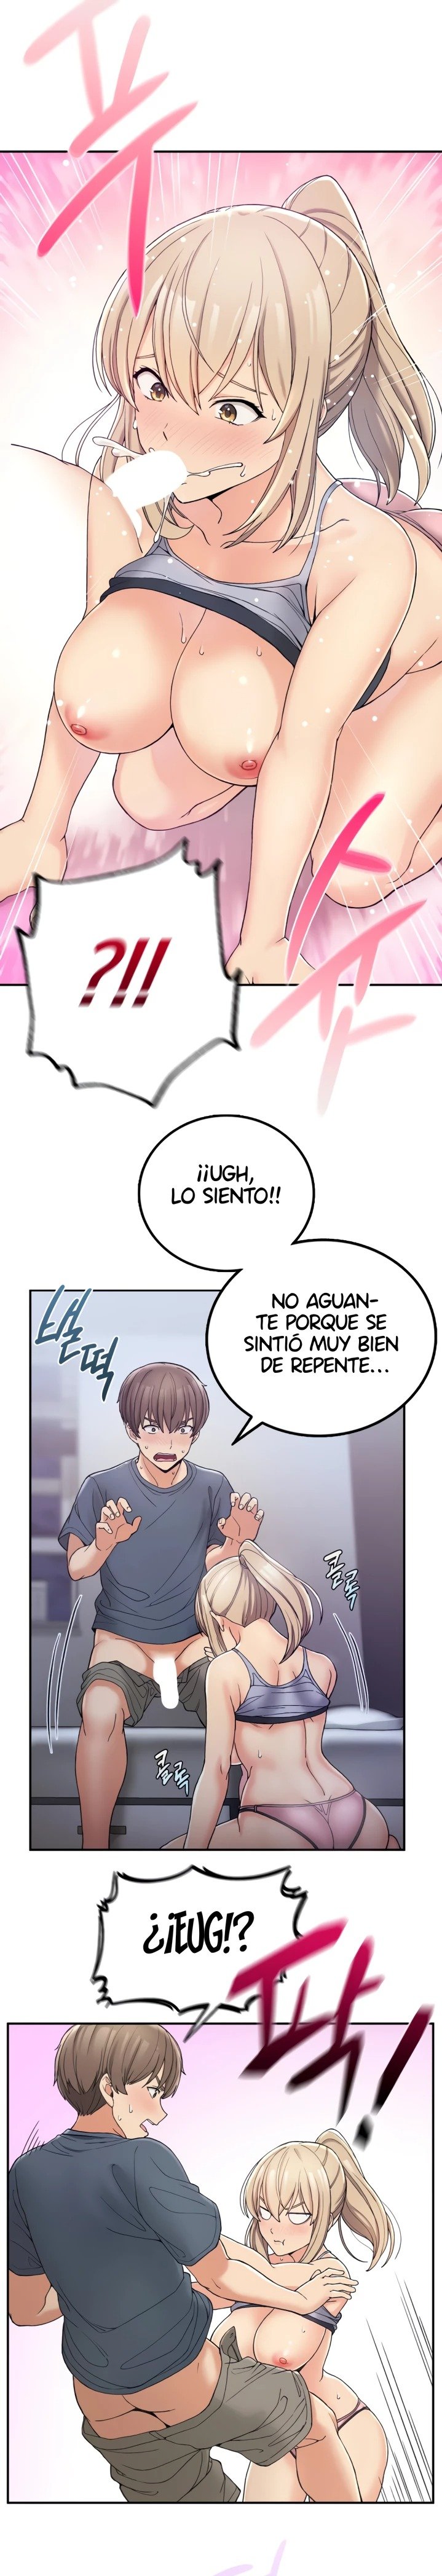 shall-we-live-together-in-the-country-raw-chap-3-37